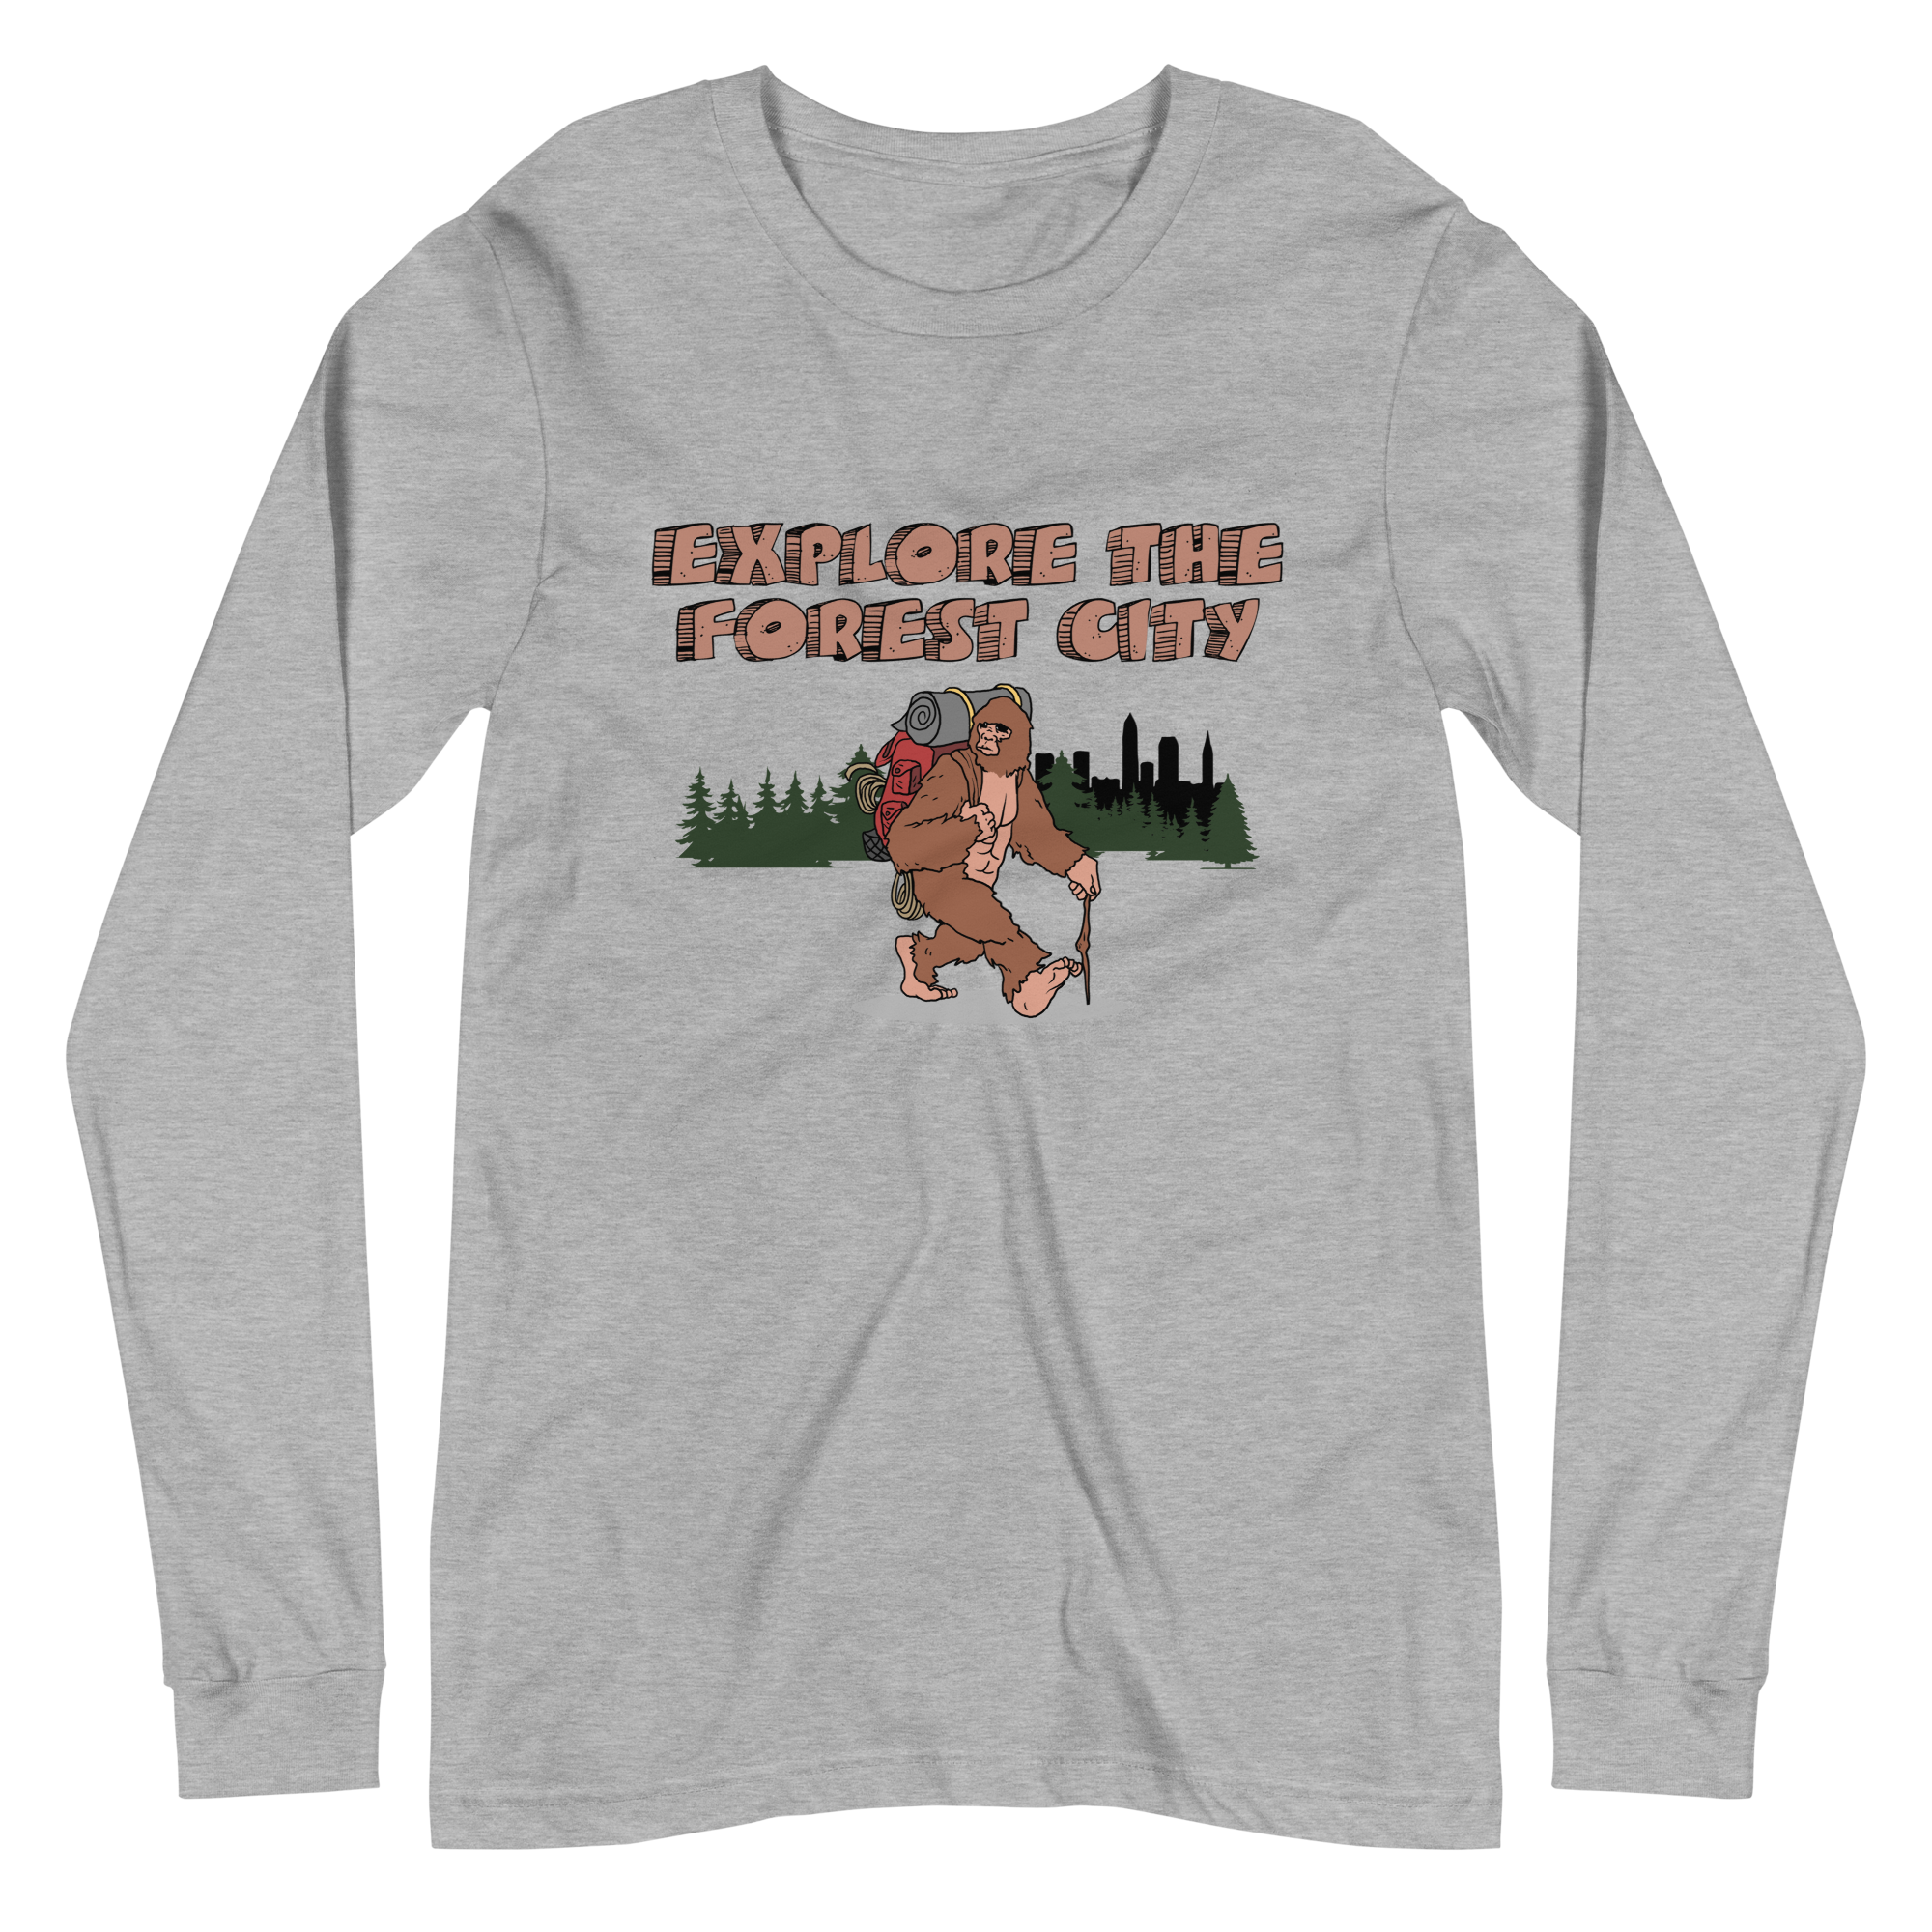 Explore the Forest City Gray Long-Sleeve T-Shirt